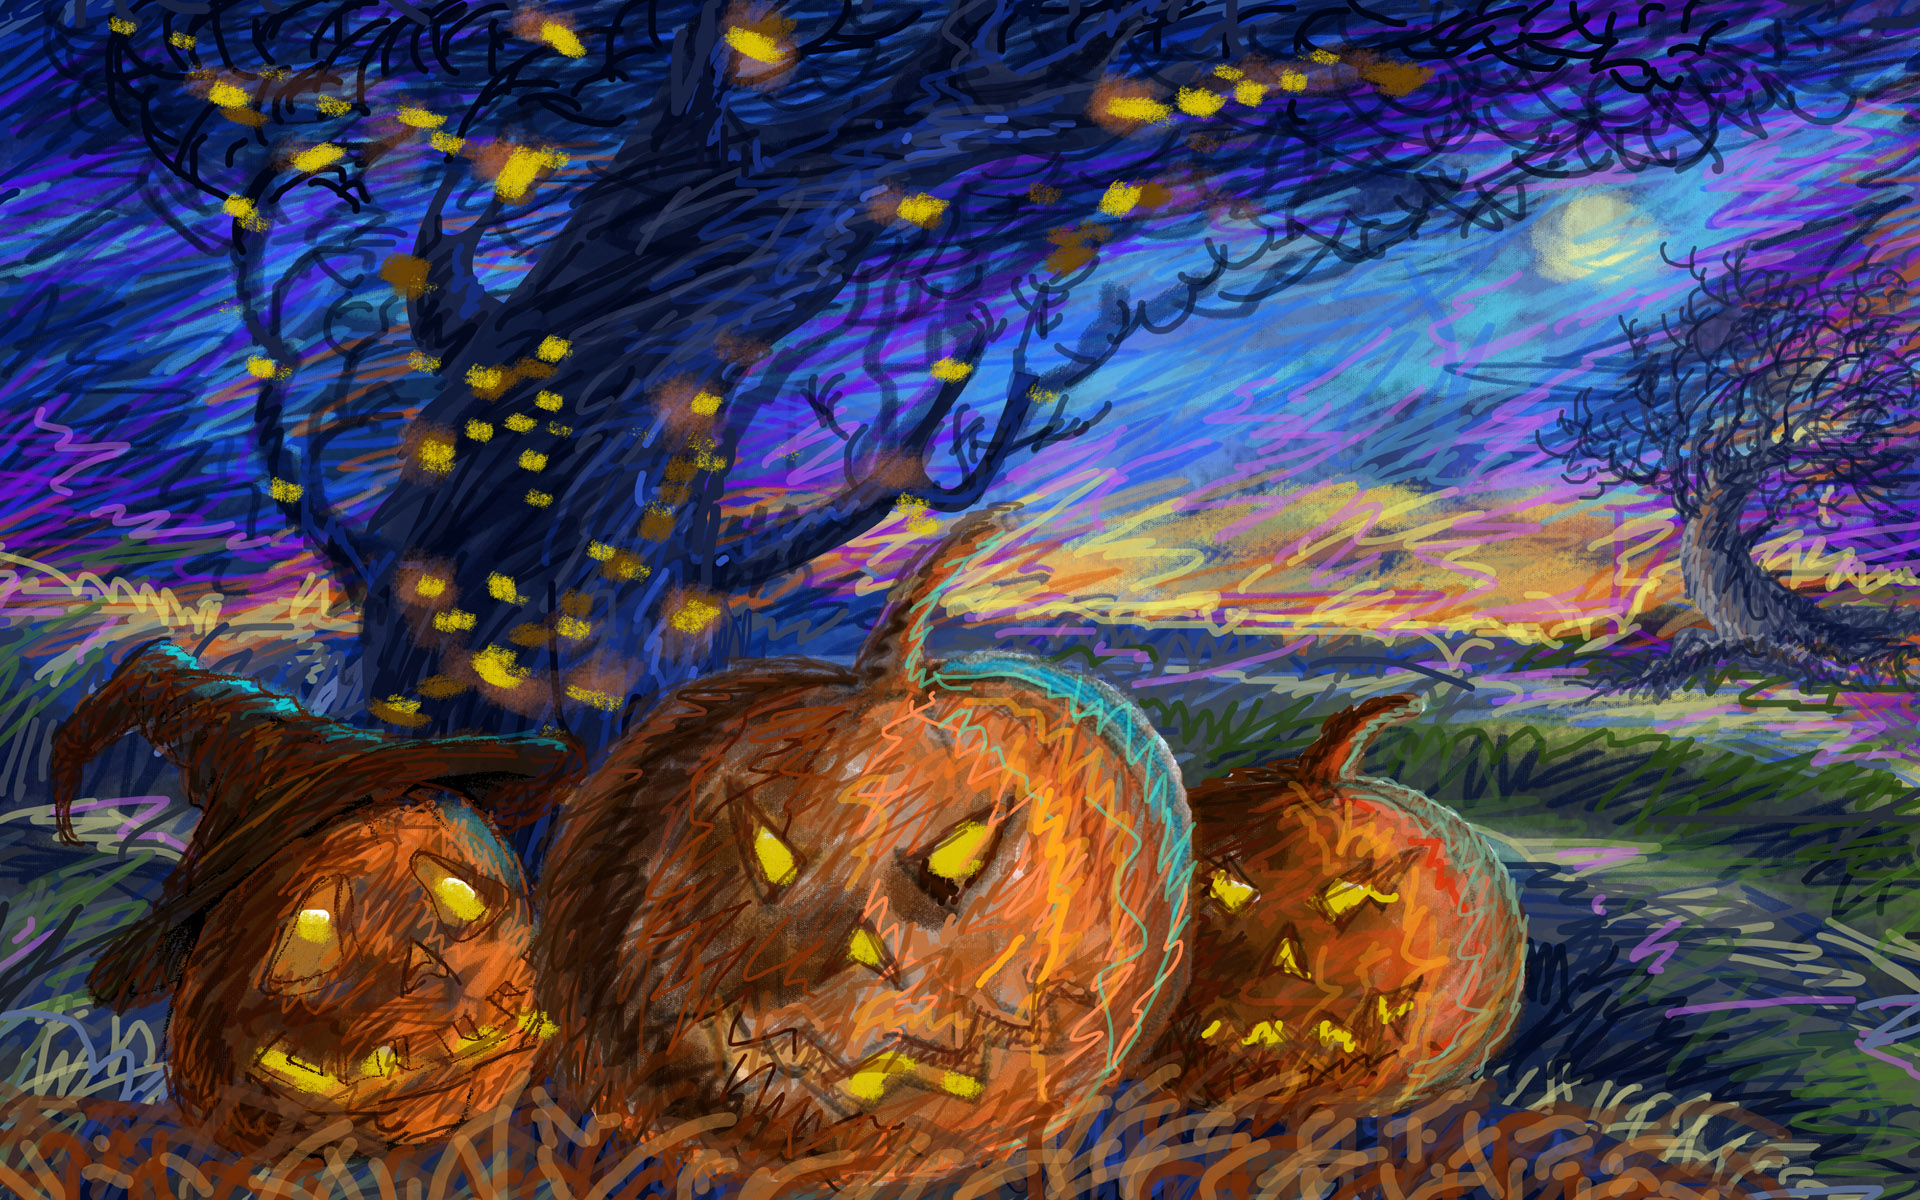 HD Wallpapers Scary Jack o'lanterns Illustrations